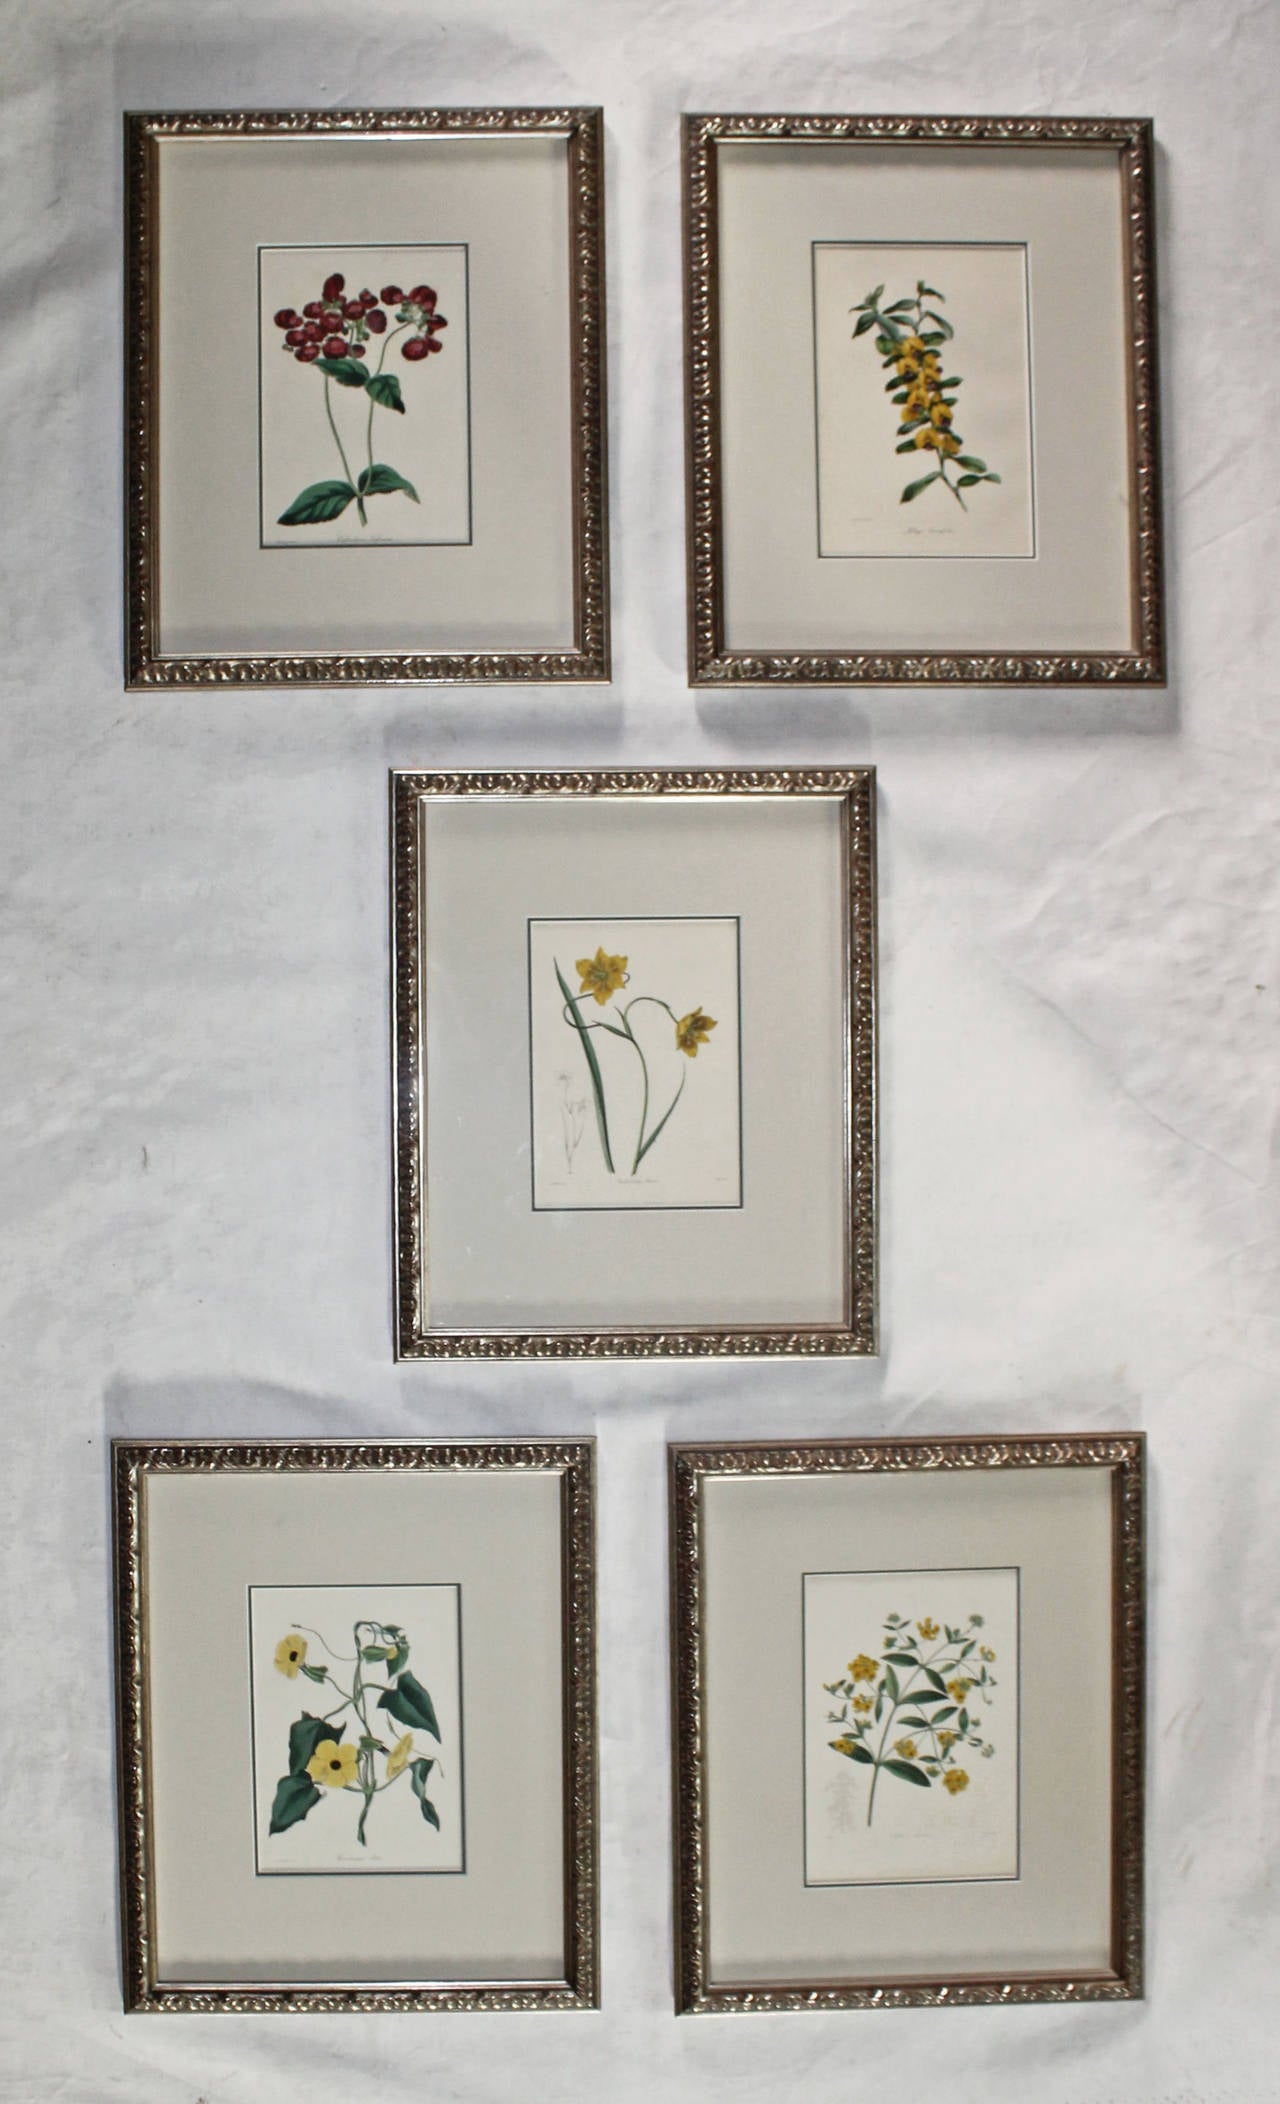 Set of 5 Paxton's magazine of botany volume 13 hand colored botanical engravings. Professionally matted in custom antiqued silver frames.

This item is located at our Dallas showroom.